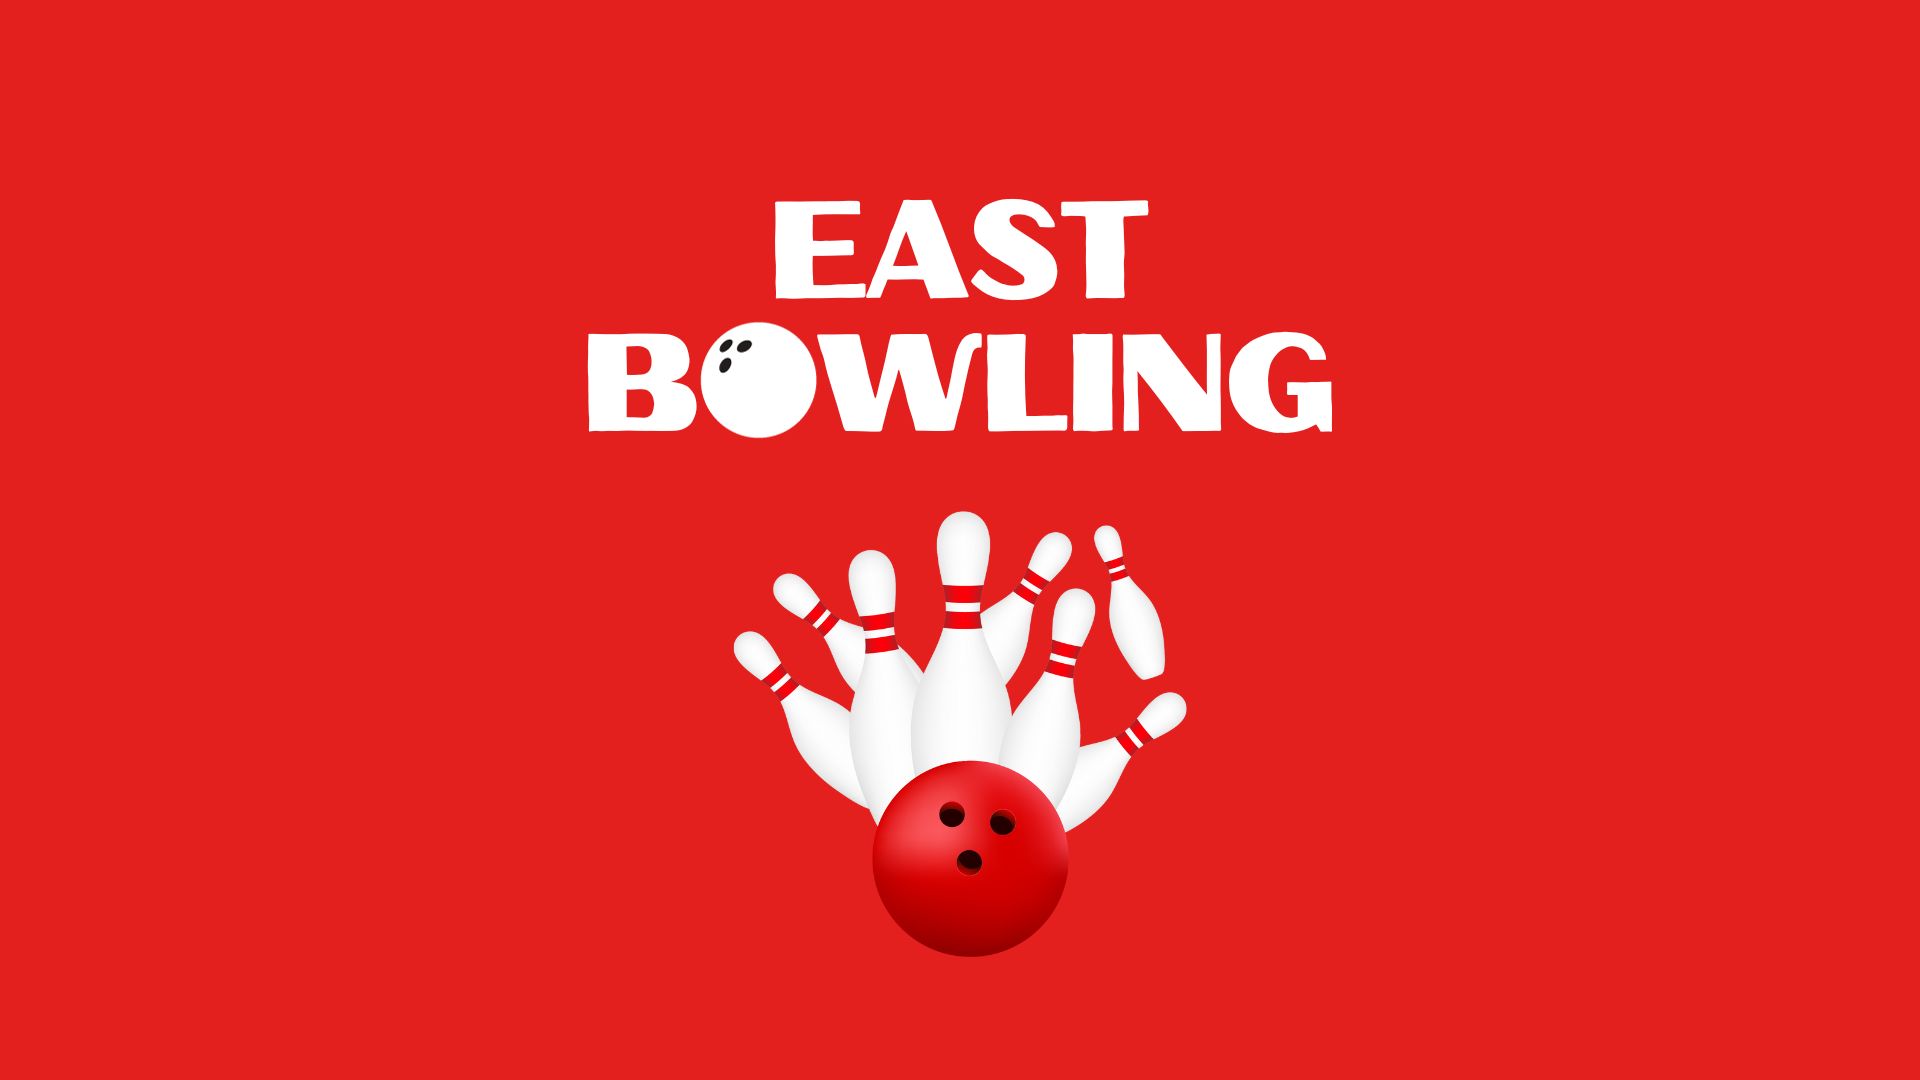 East Bowling: A look into the sport